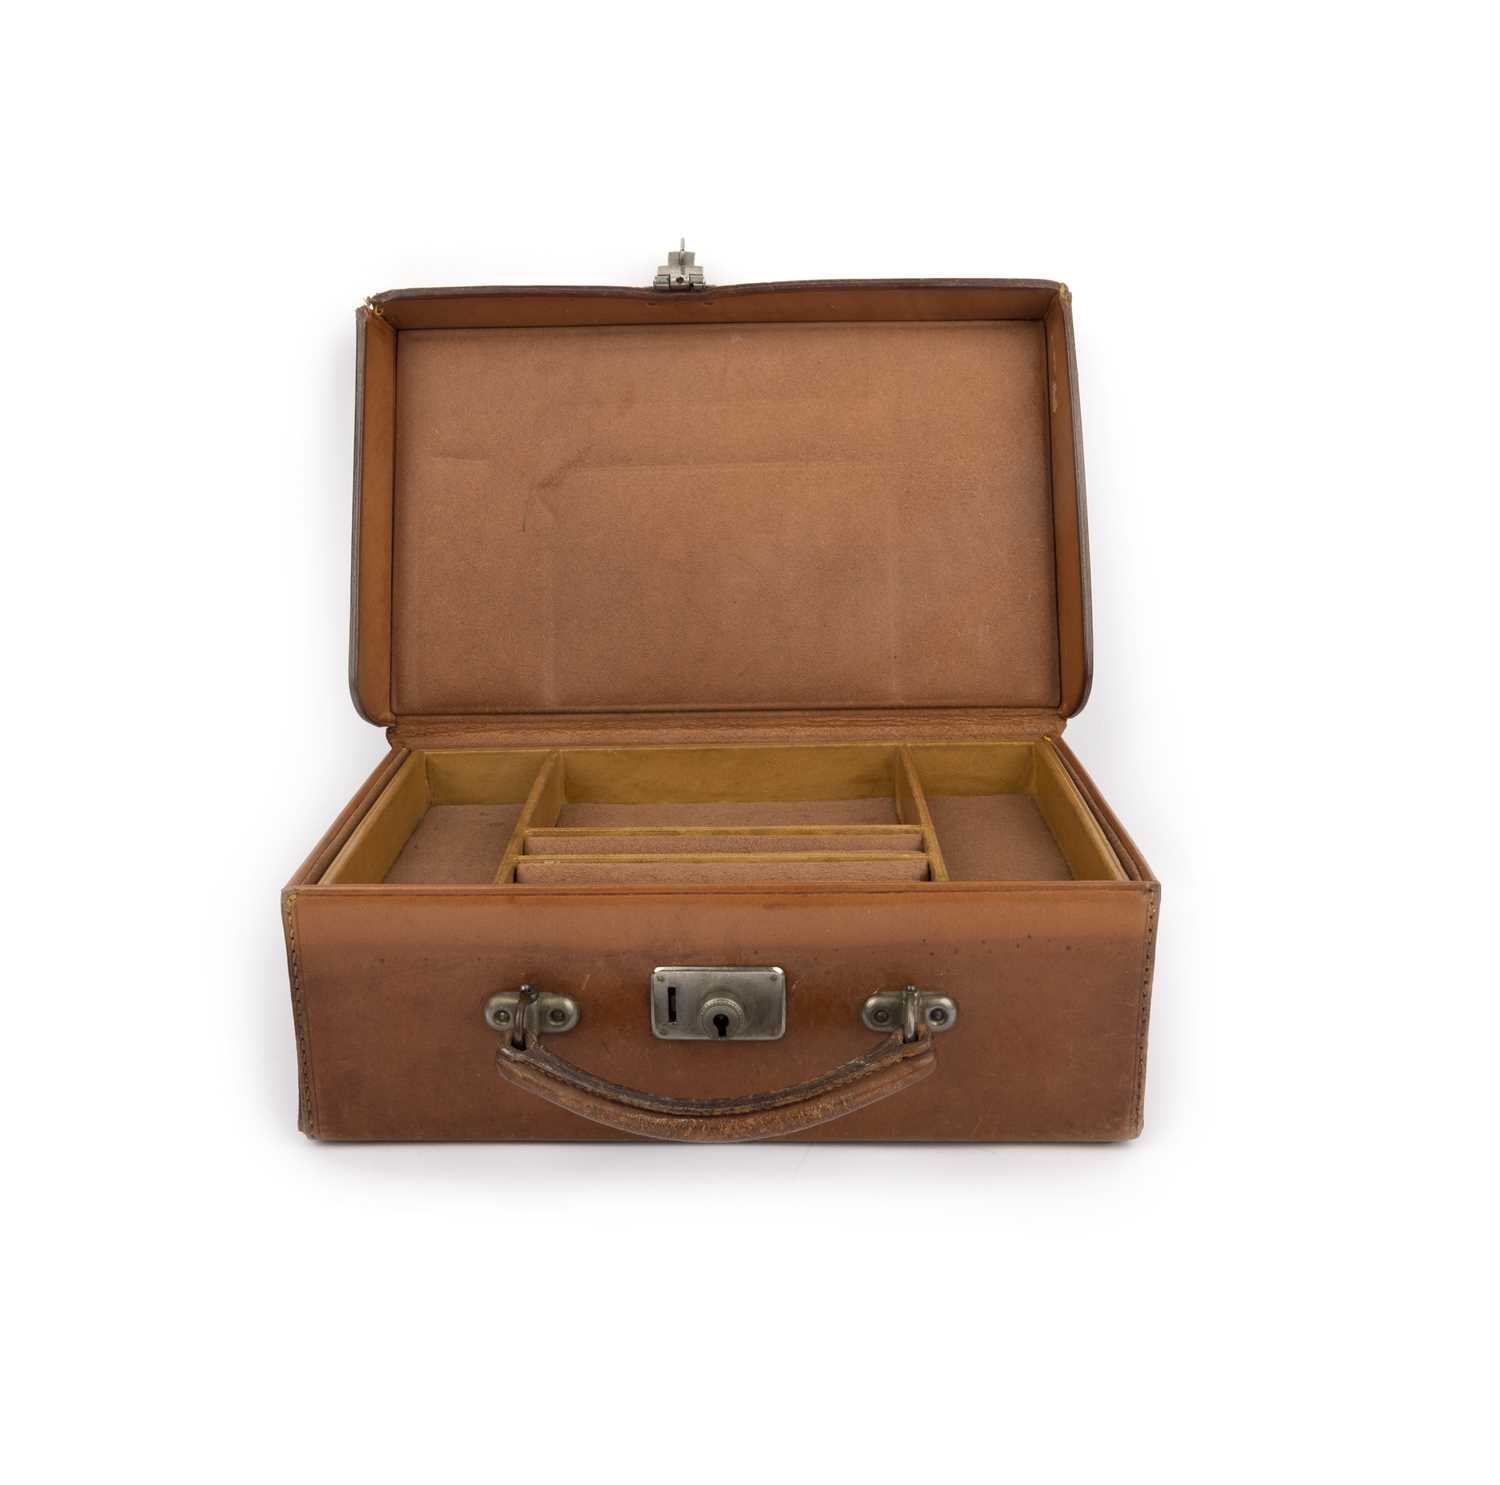 No reserve - a jewellery box, first half 20th century, briefcase style, in light brown leather,